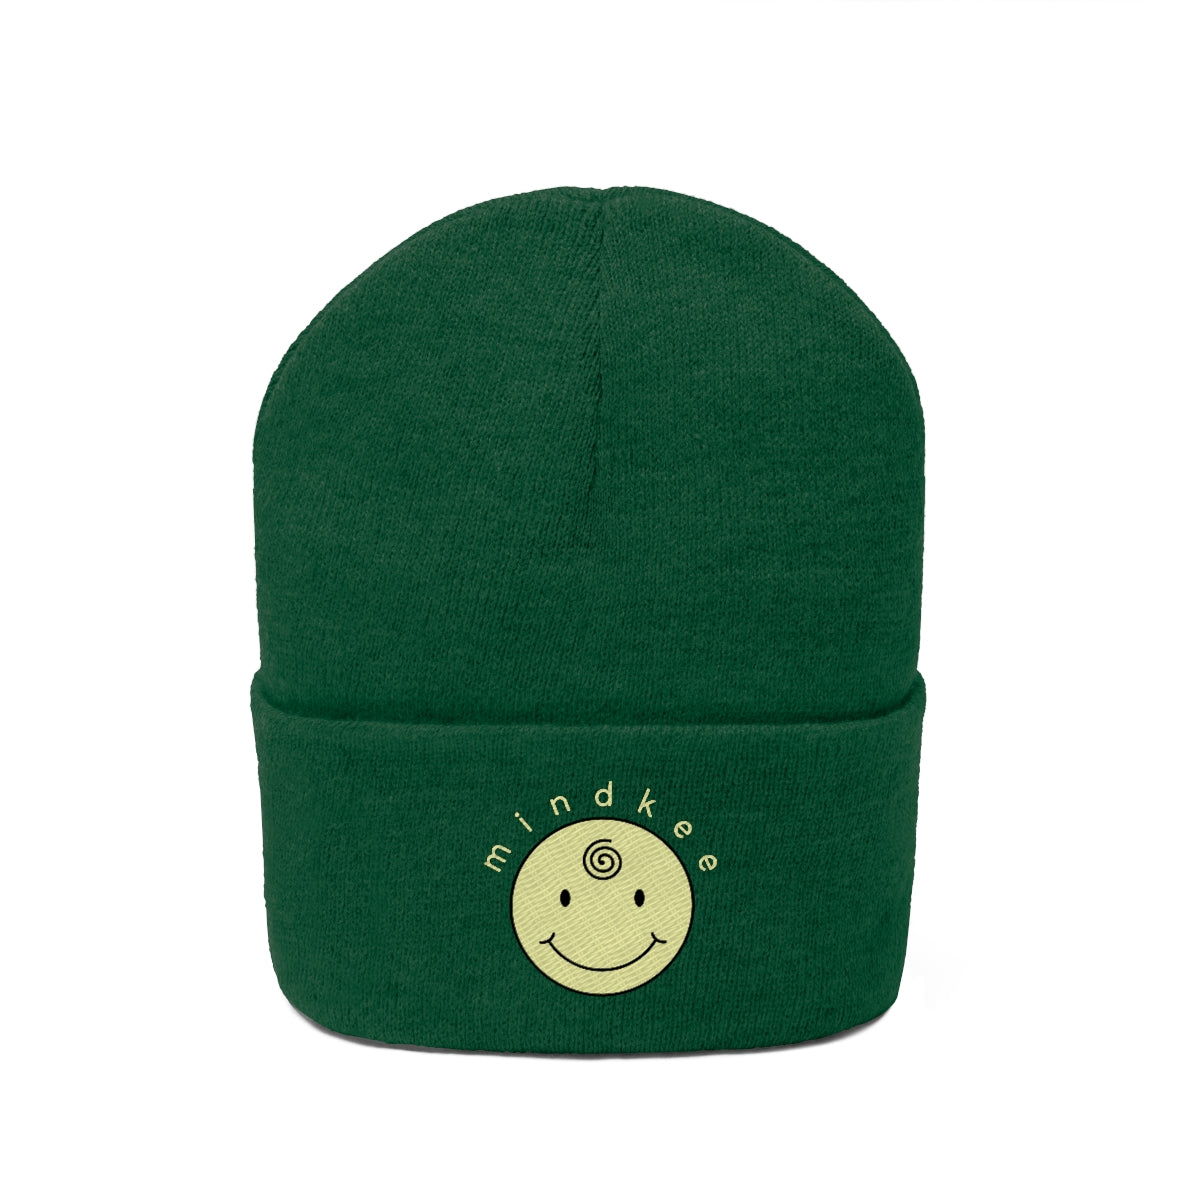 Mindkee Embroidery Beanie (Yellow Smiley)